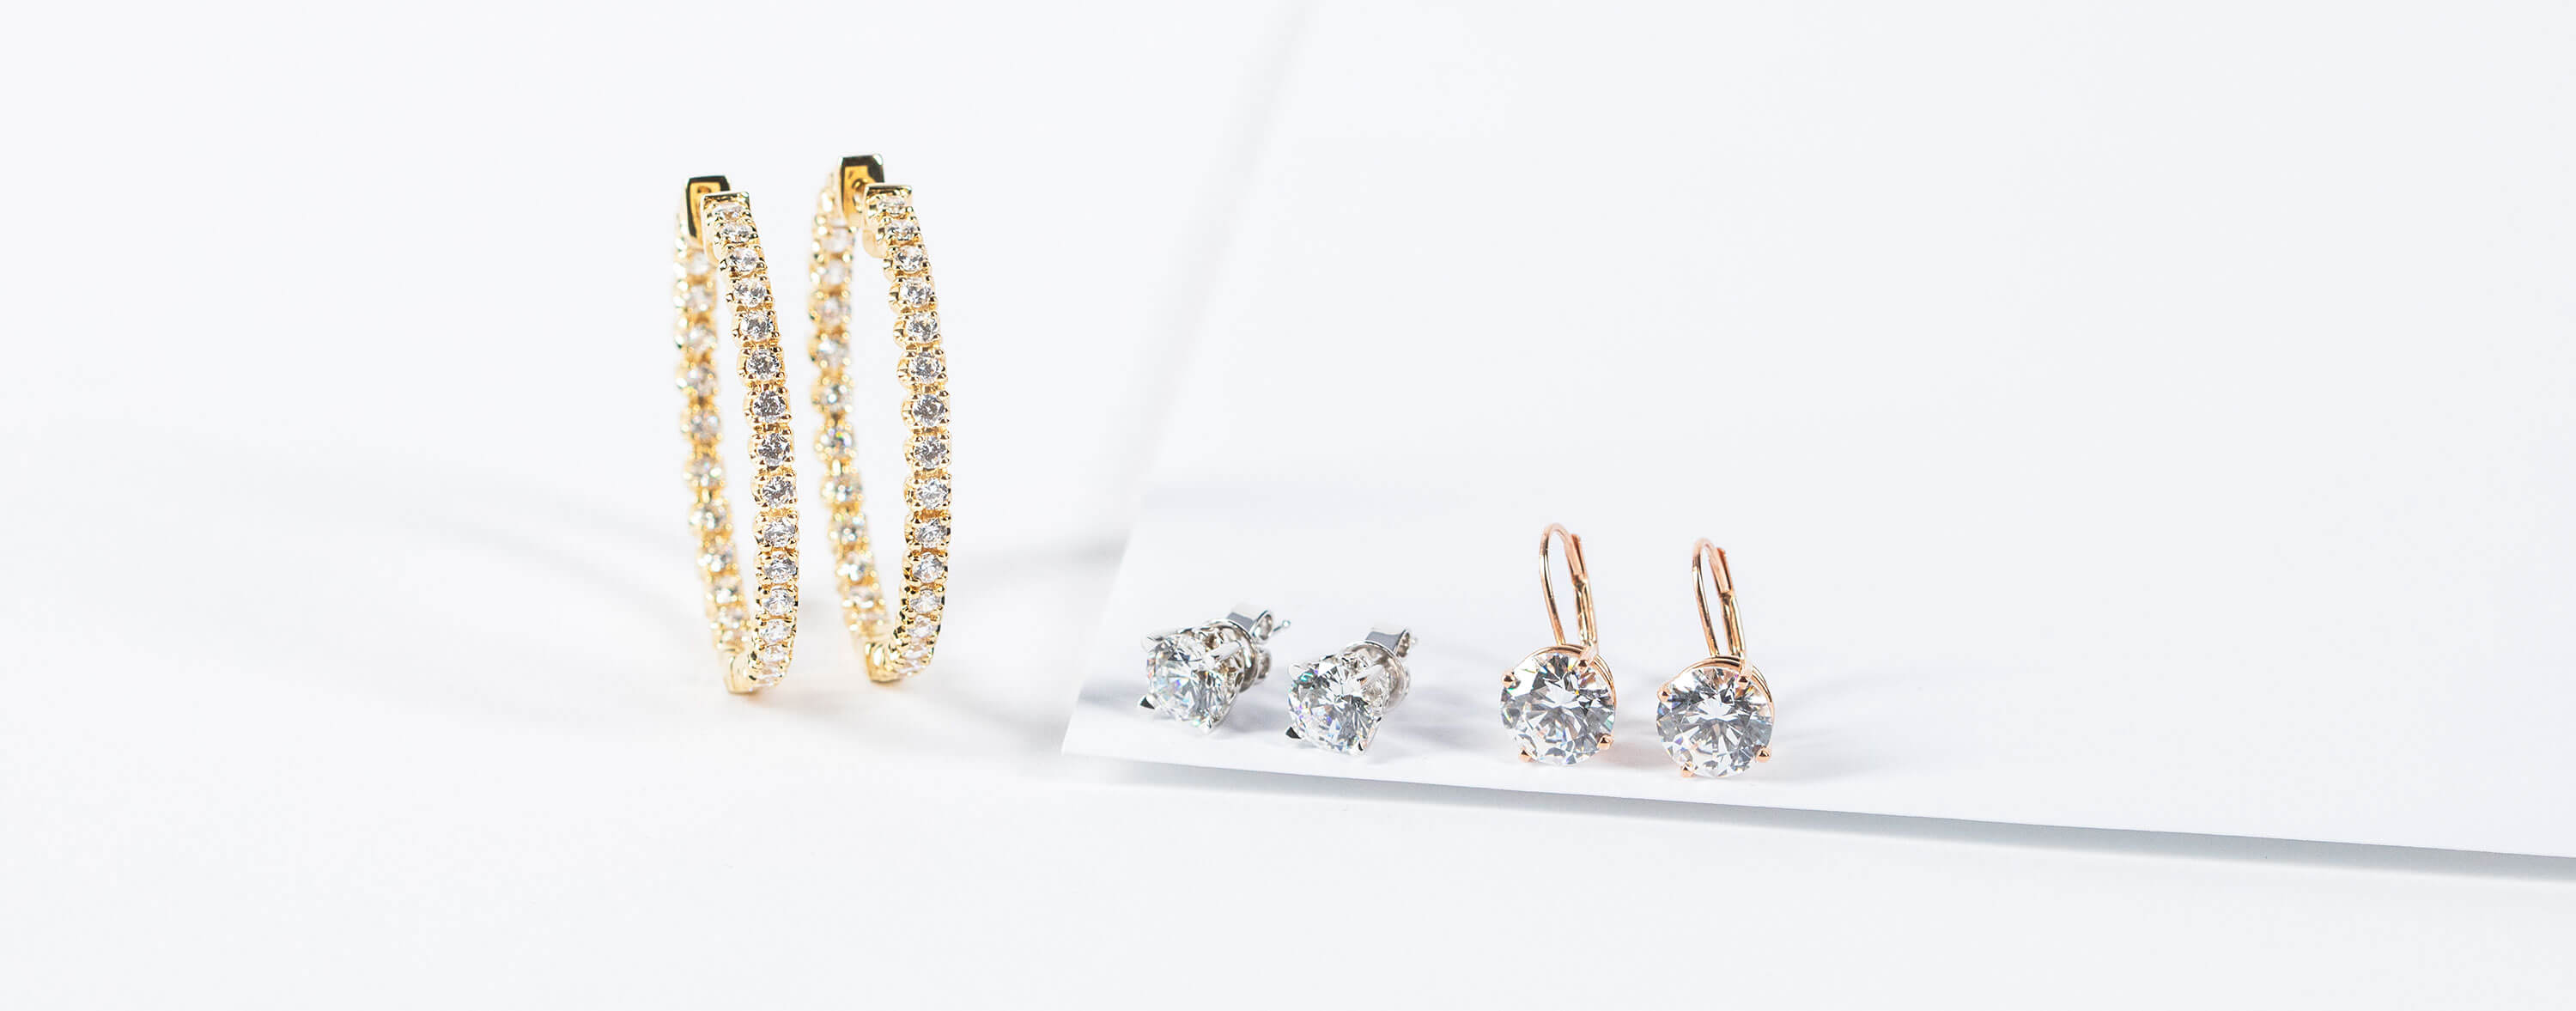 Assorted Diamond Nexus earrings in white, yellow and rose gold.